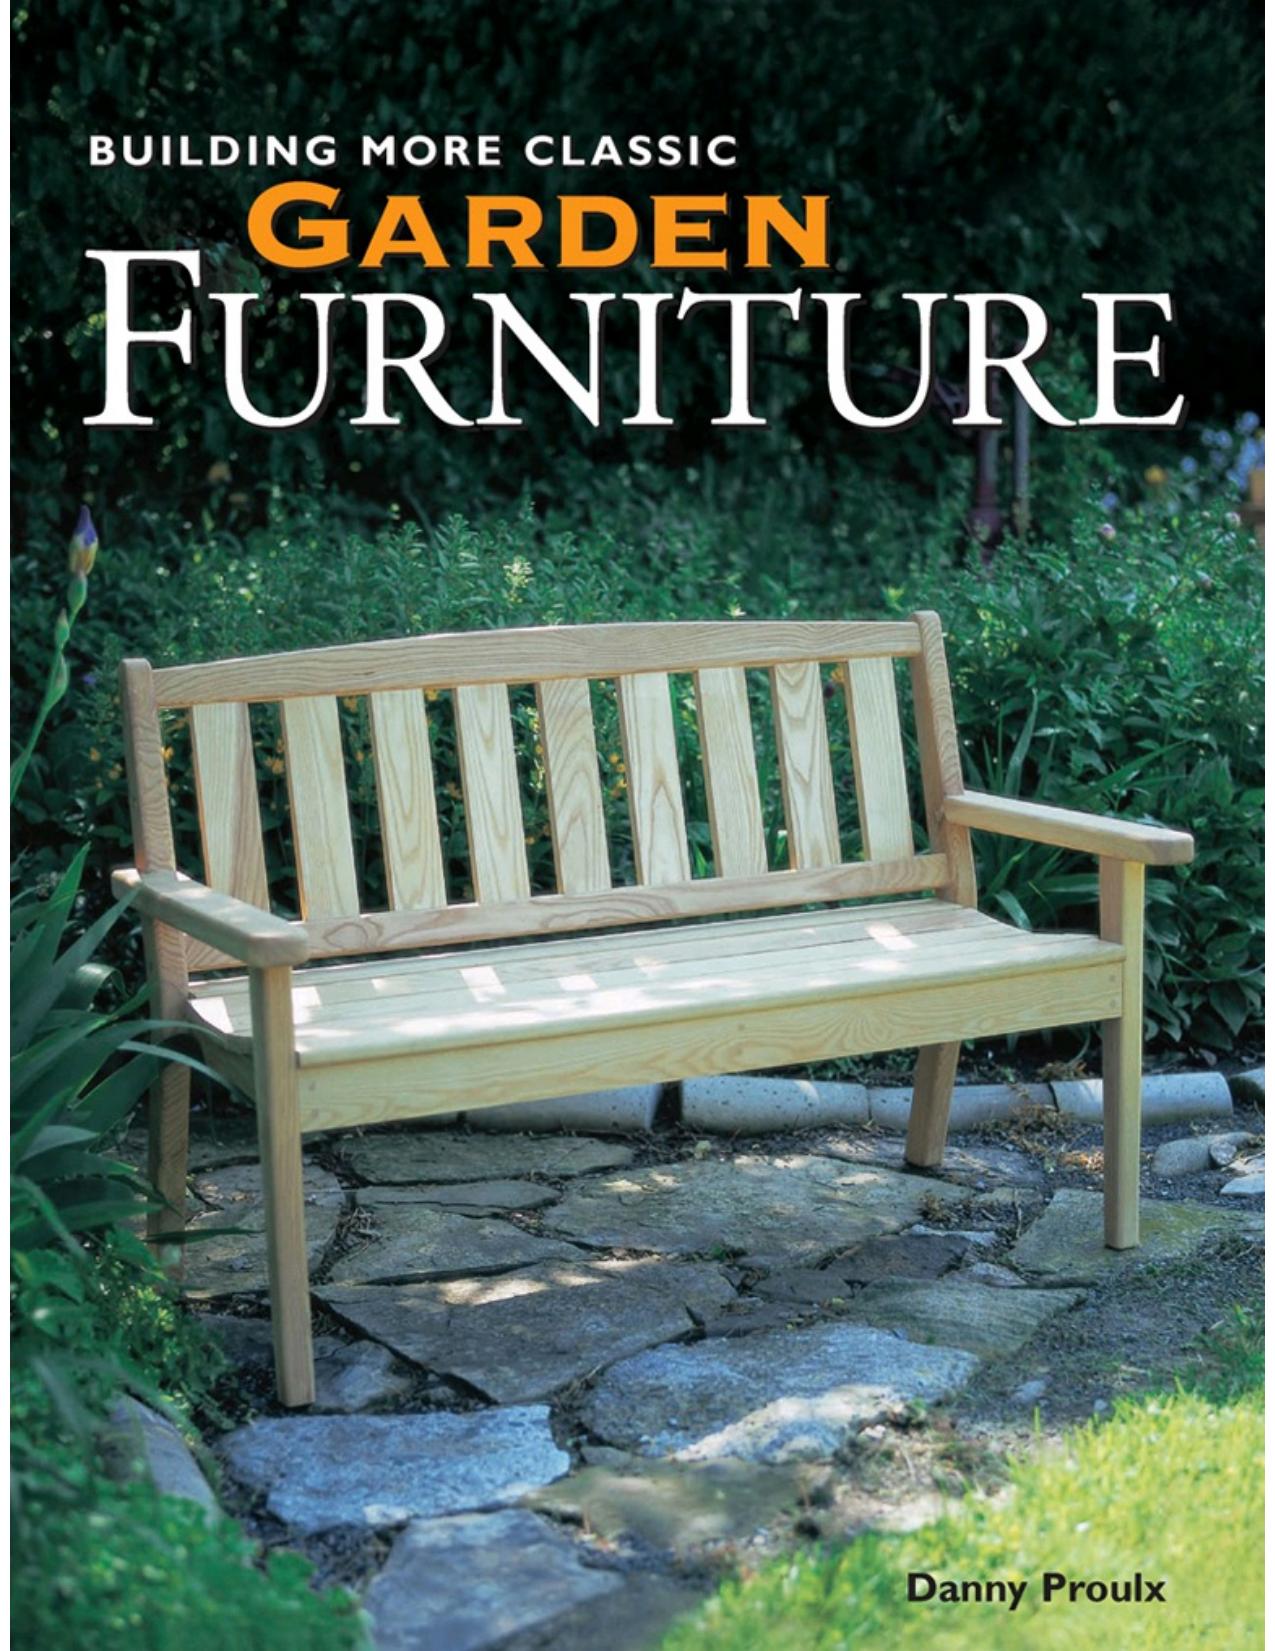 Building More Classic Garden Furniture by Danny Proulx